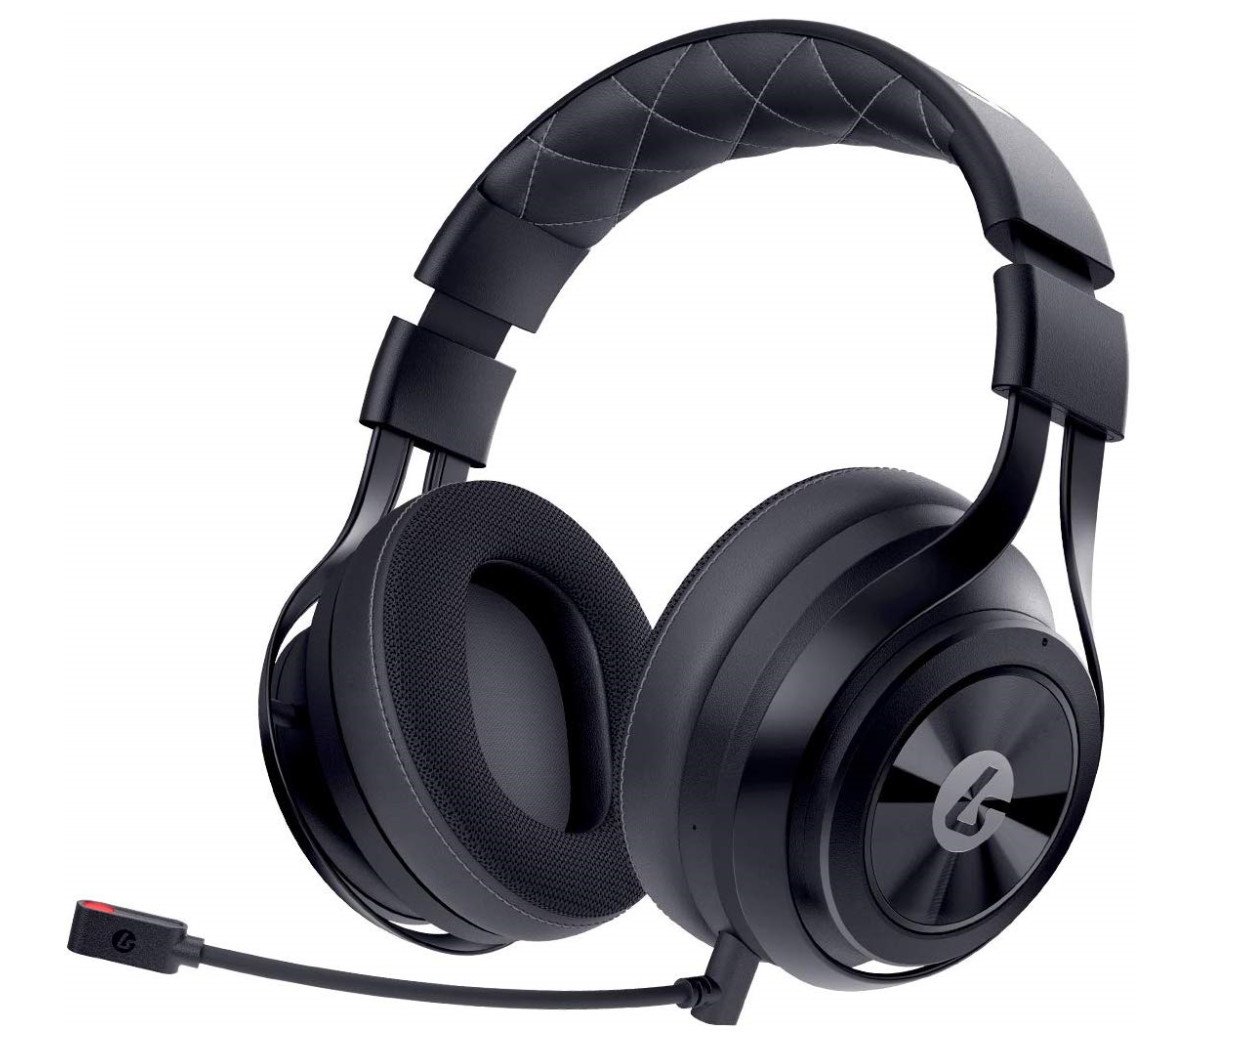 The Lucidsound LS35X headset floats against a white background.